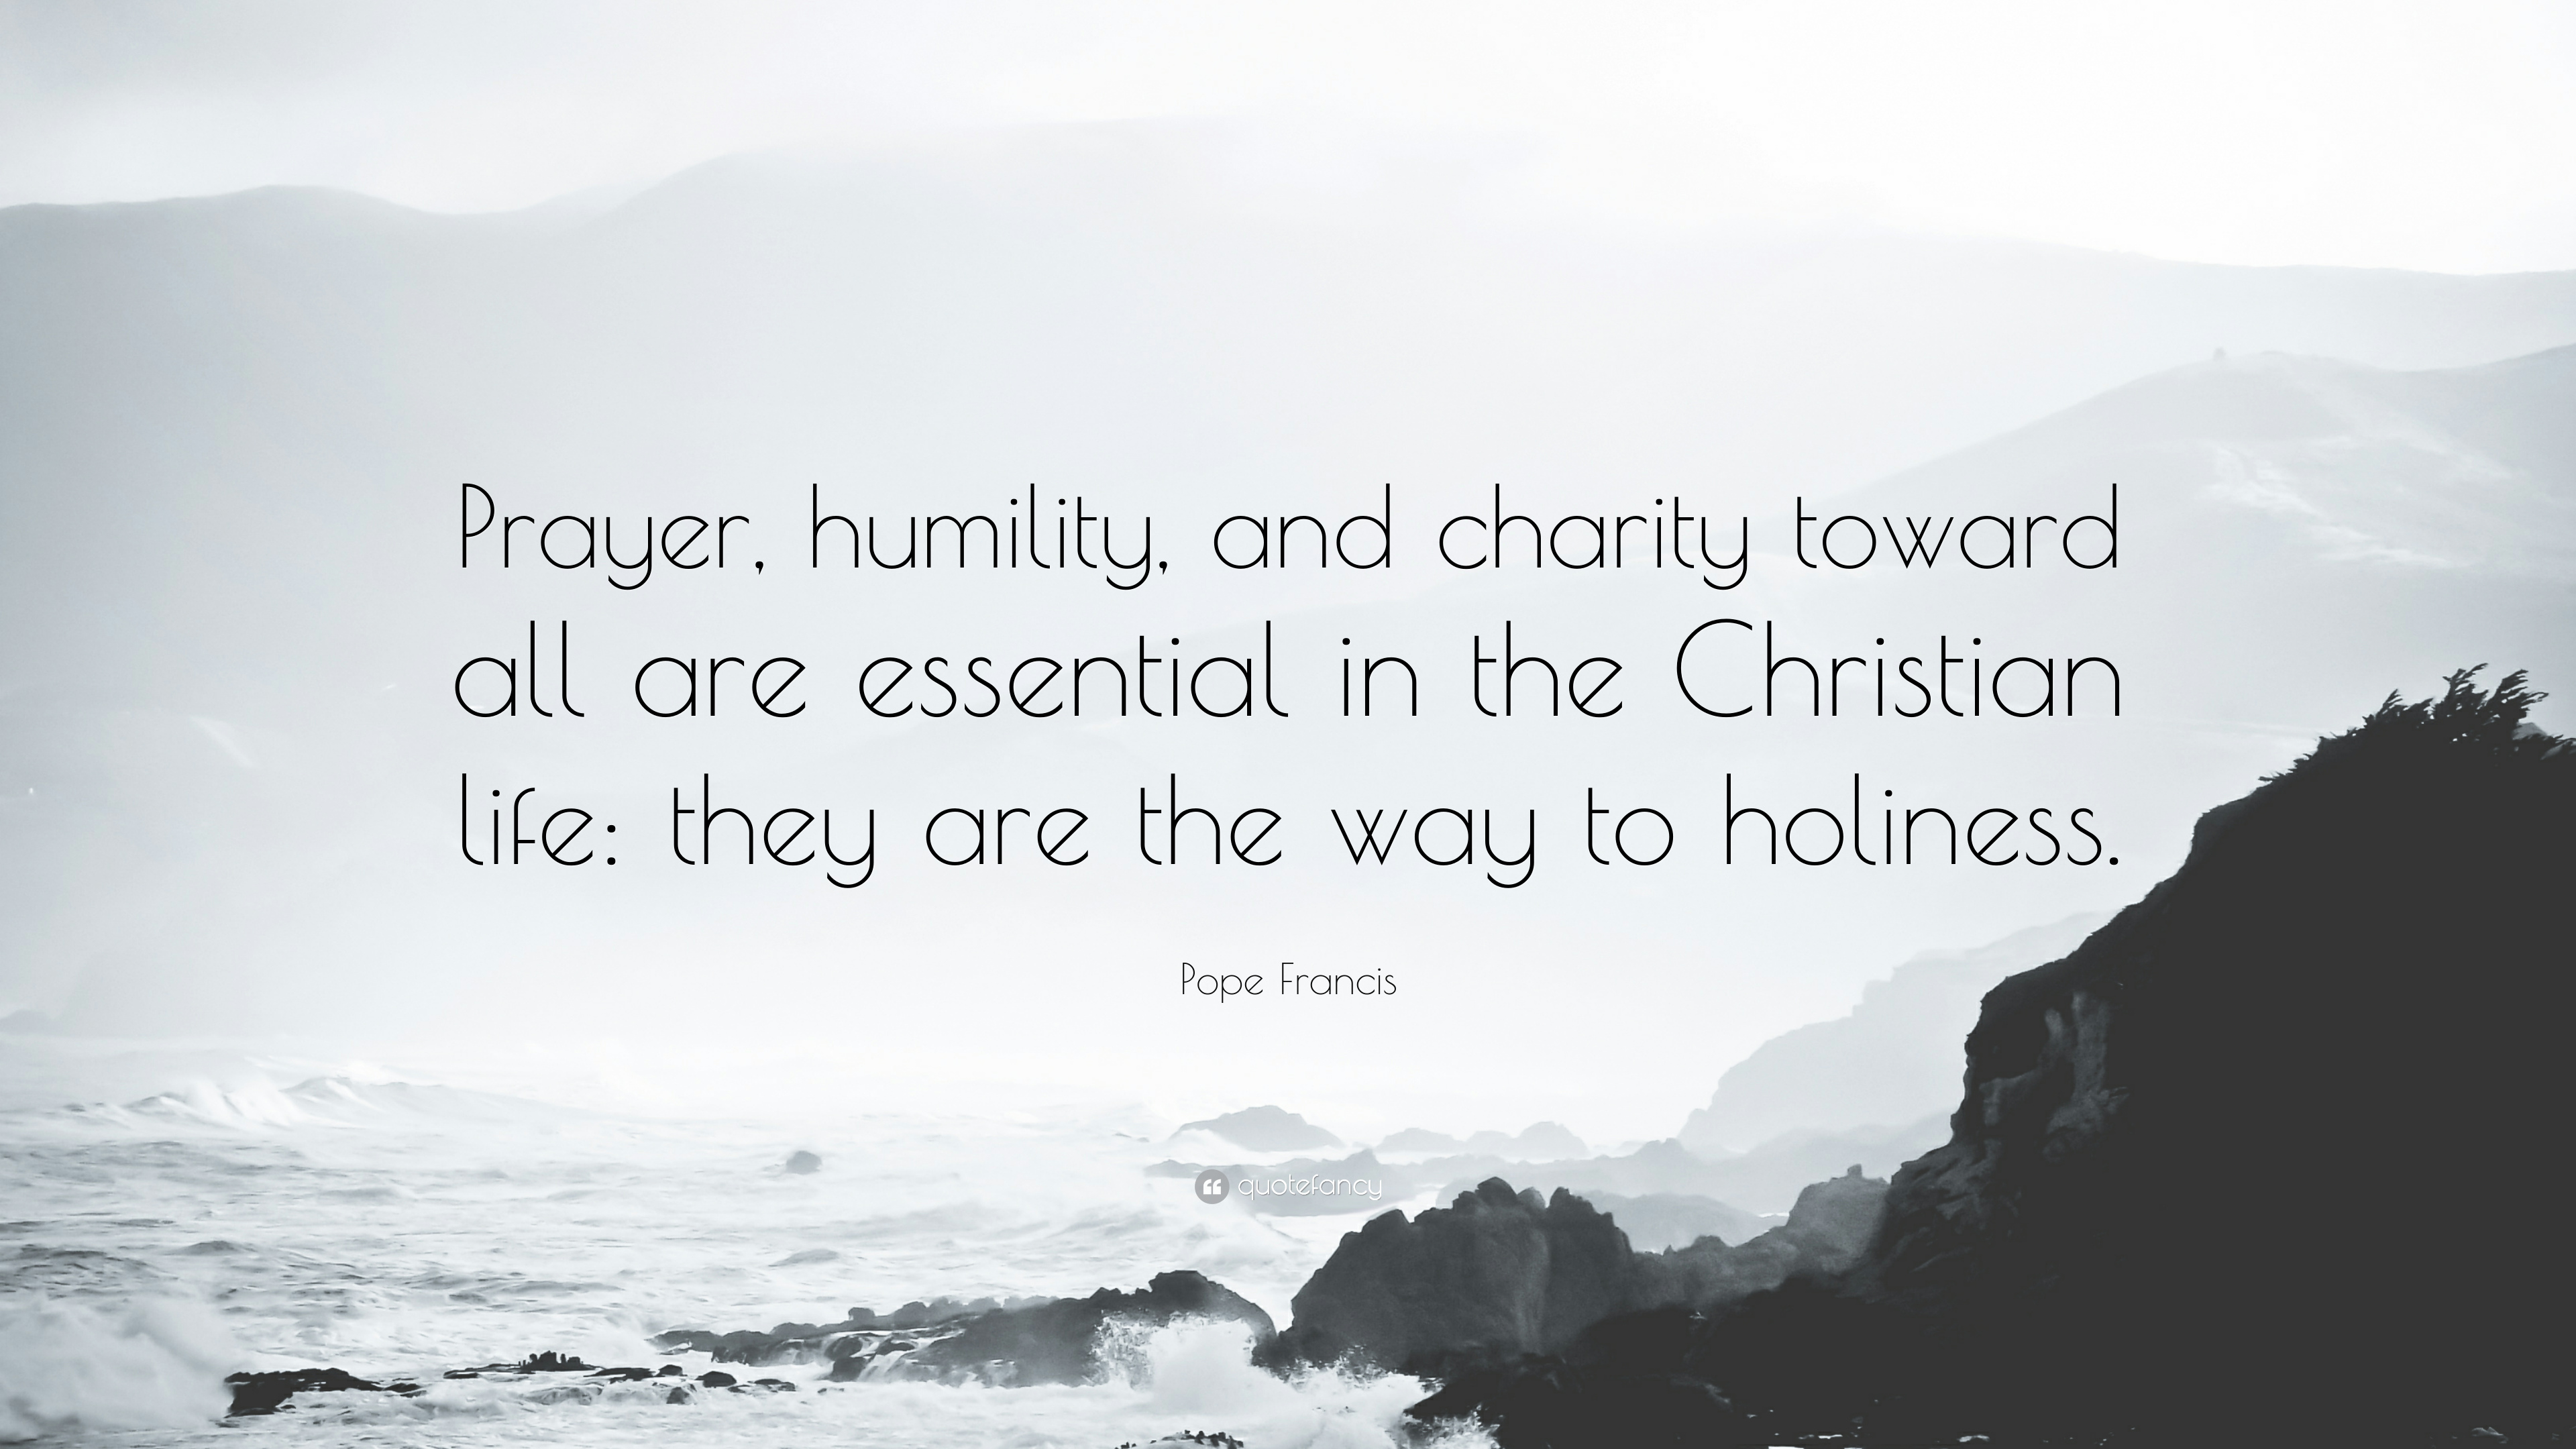 prayer humility and charity toward all are essential in the christian life they are the way to holiness. pope francis